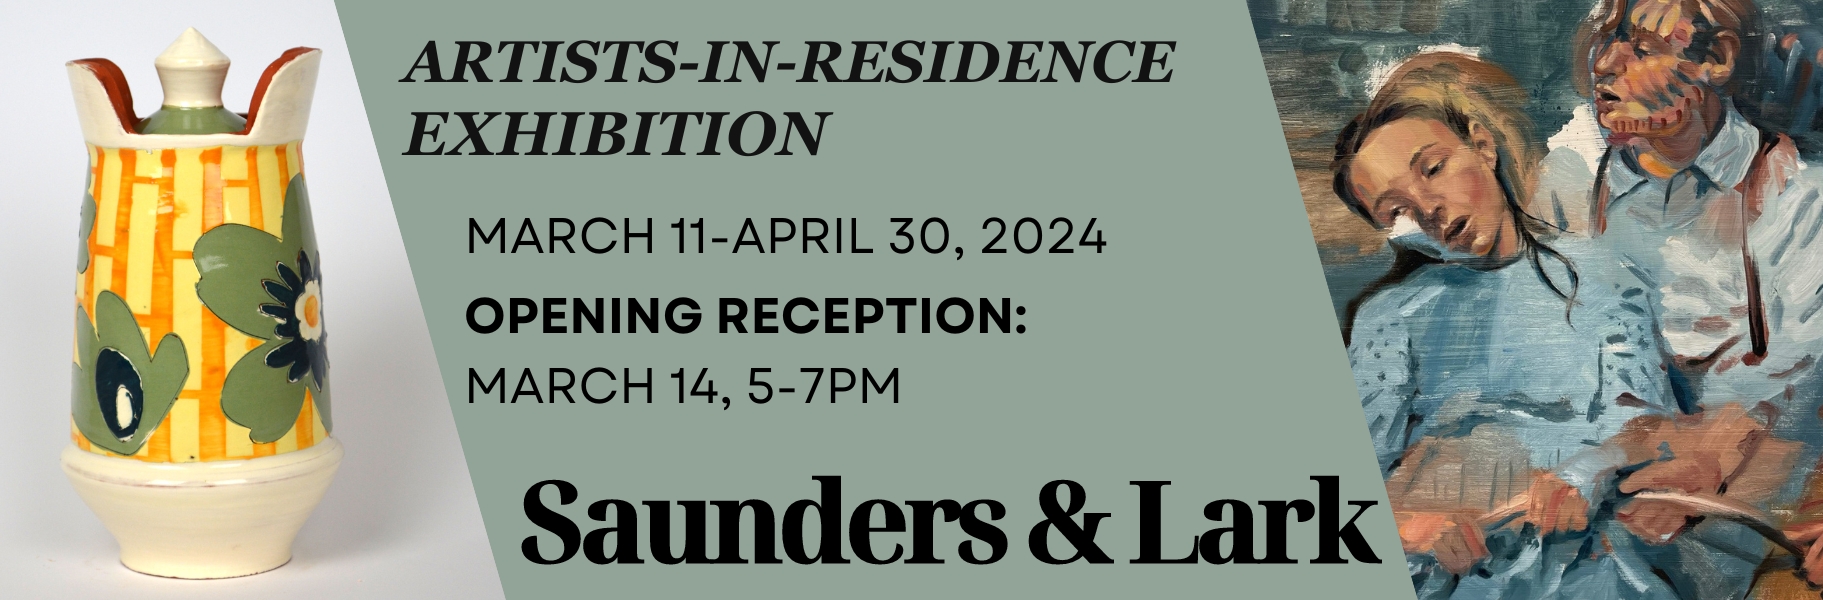 Artist-in-Residence Exhibition